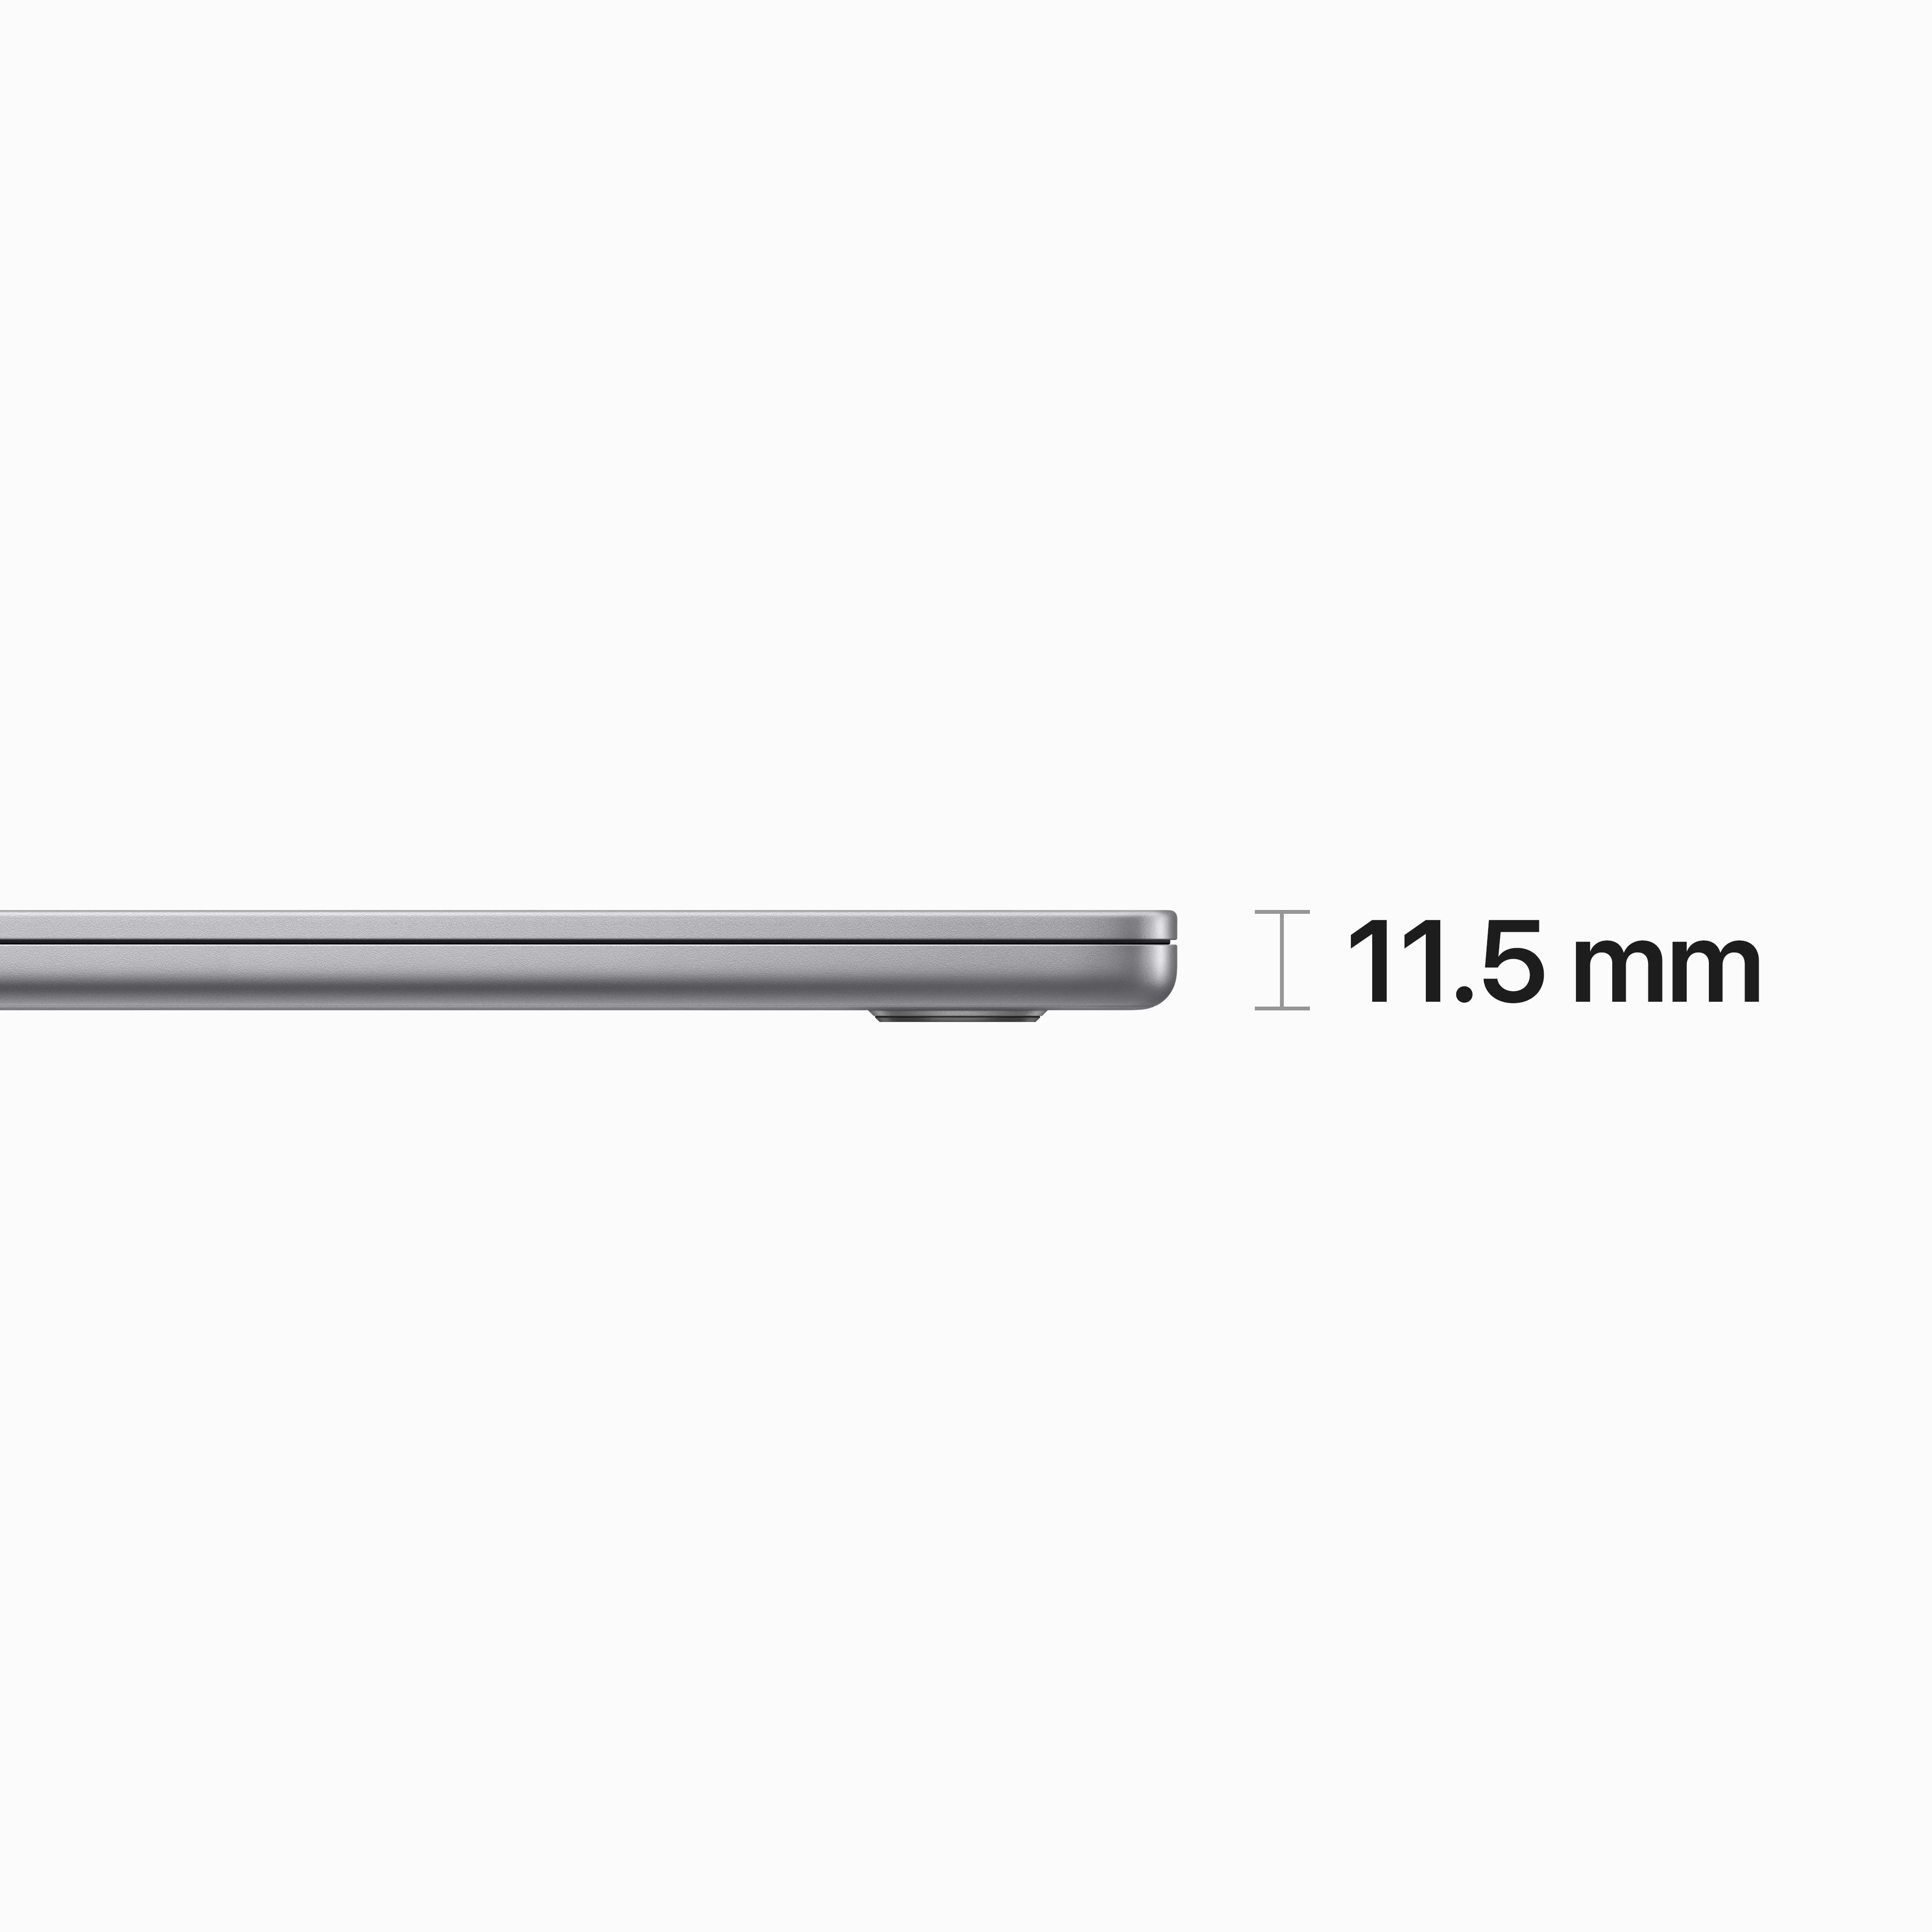 '15-inch MacBook Air: Apple M2 chip with 8-core CPU and 10-core GPU 512GB - Space Grey  מחשב אייקון  נייד'